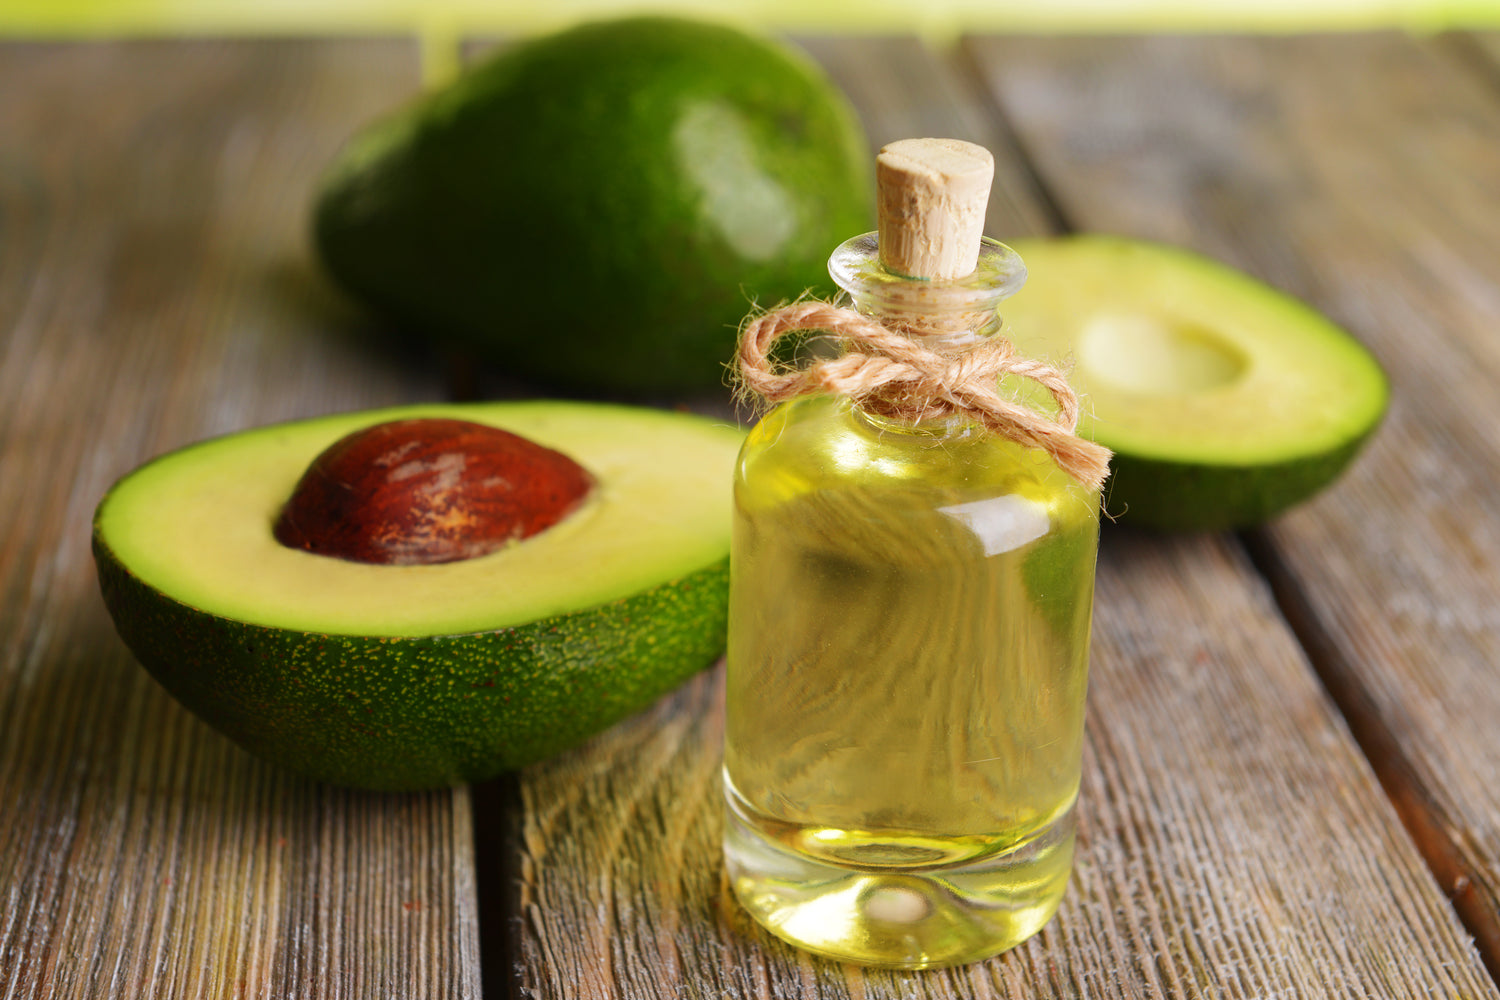 Best Oils for Beards: What are the Benefits of Using Avocado Oil for Beard Care?